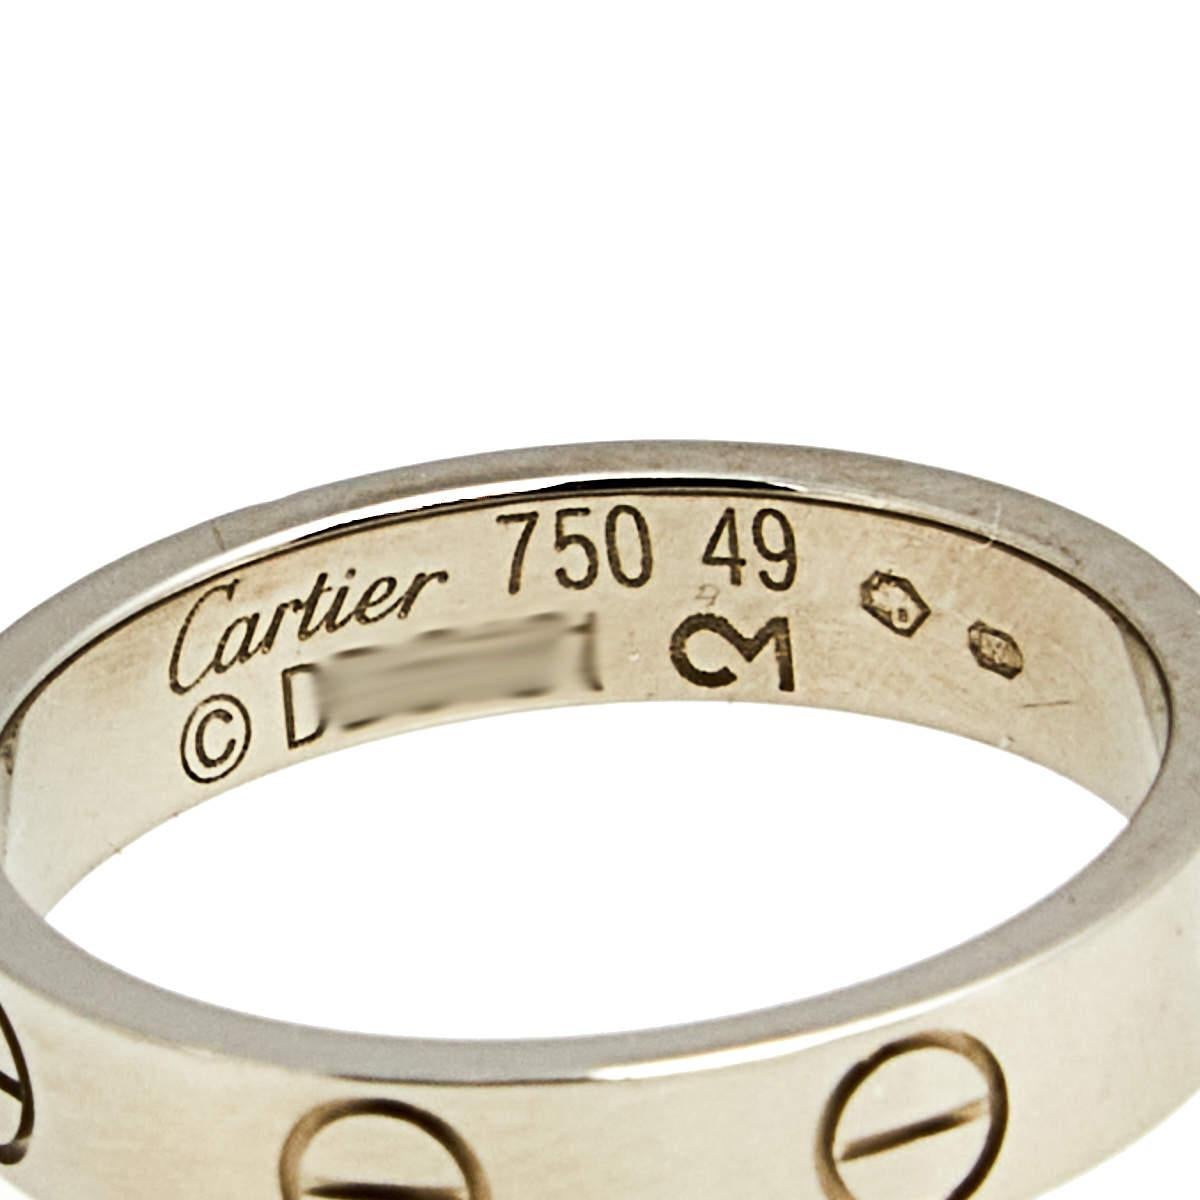 Cartier Love 18k White Gold Narrow Wedding Band Ring Size 49 1